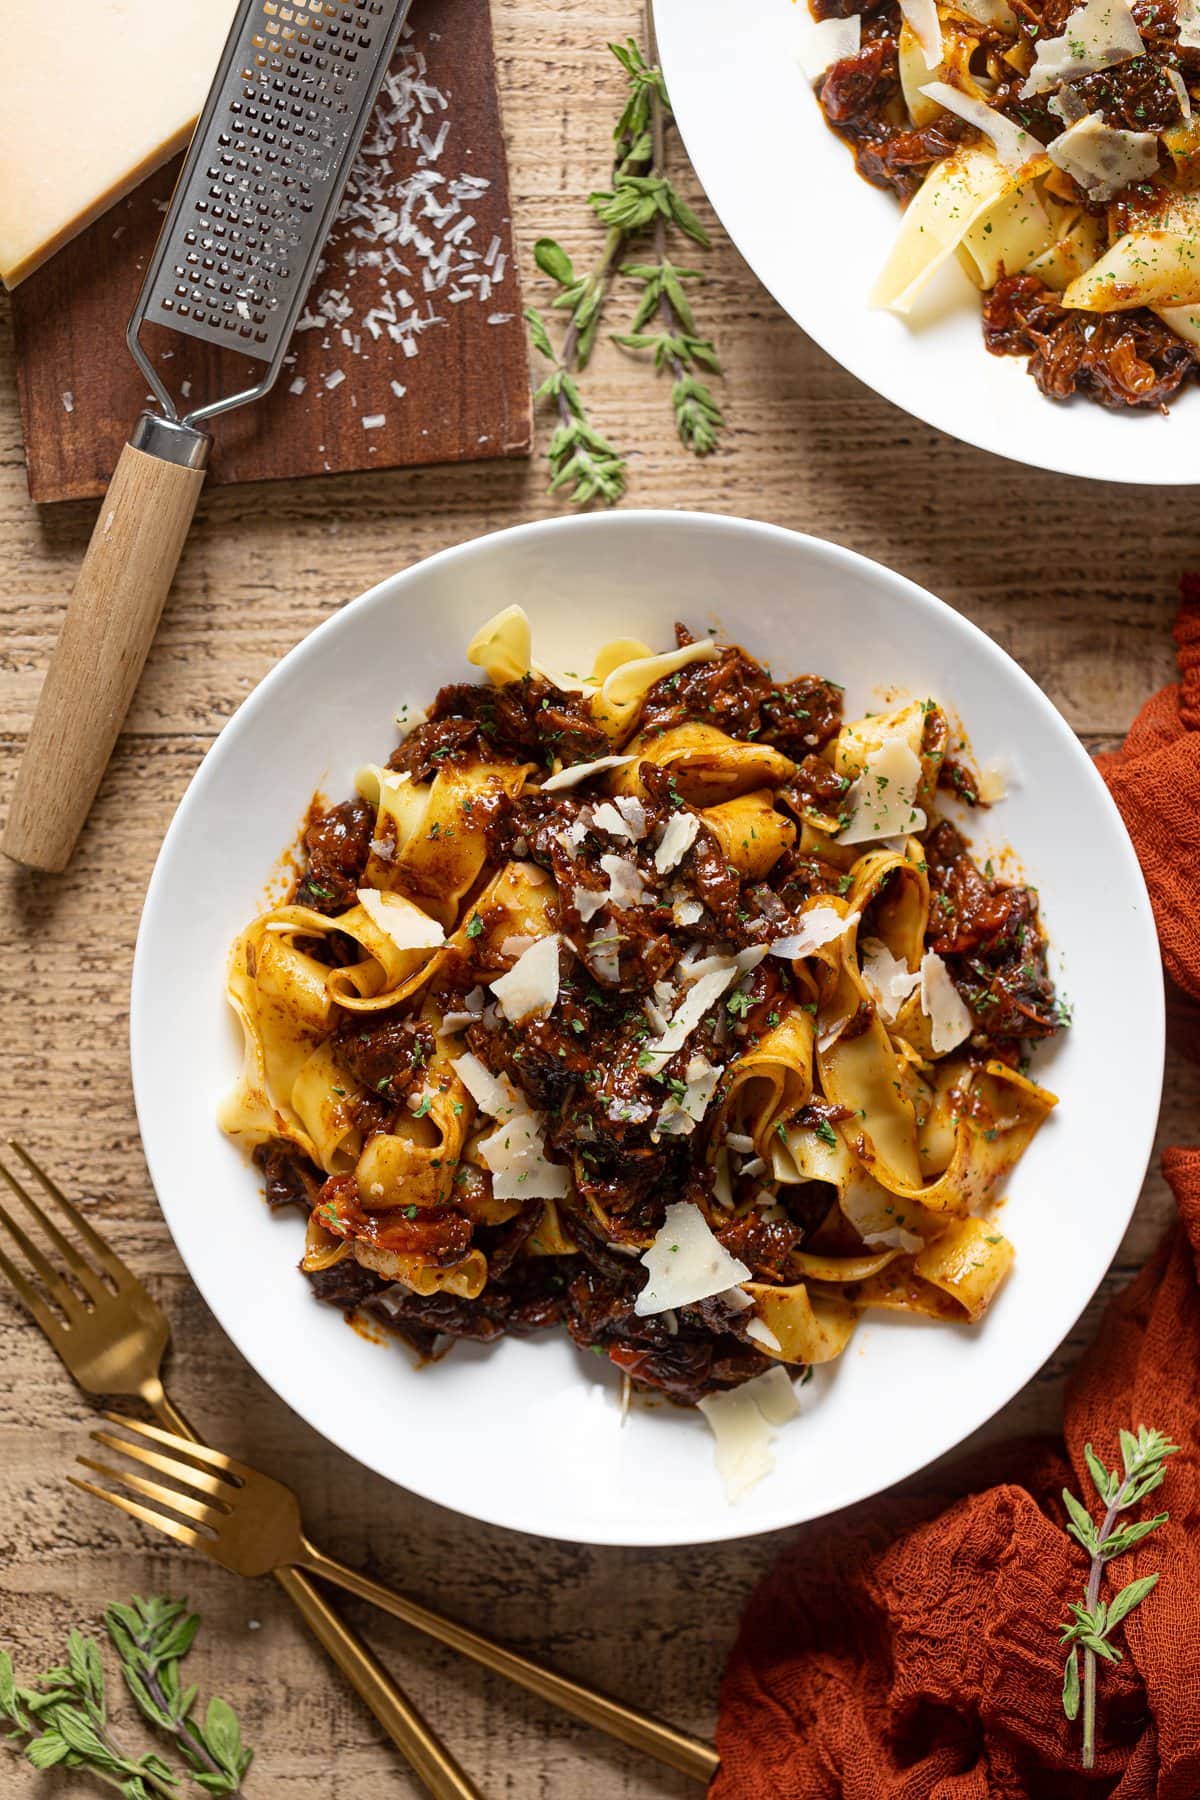 Overhead shot of a plate of Braised Steak Ragu with Pappardelle